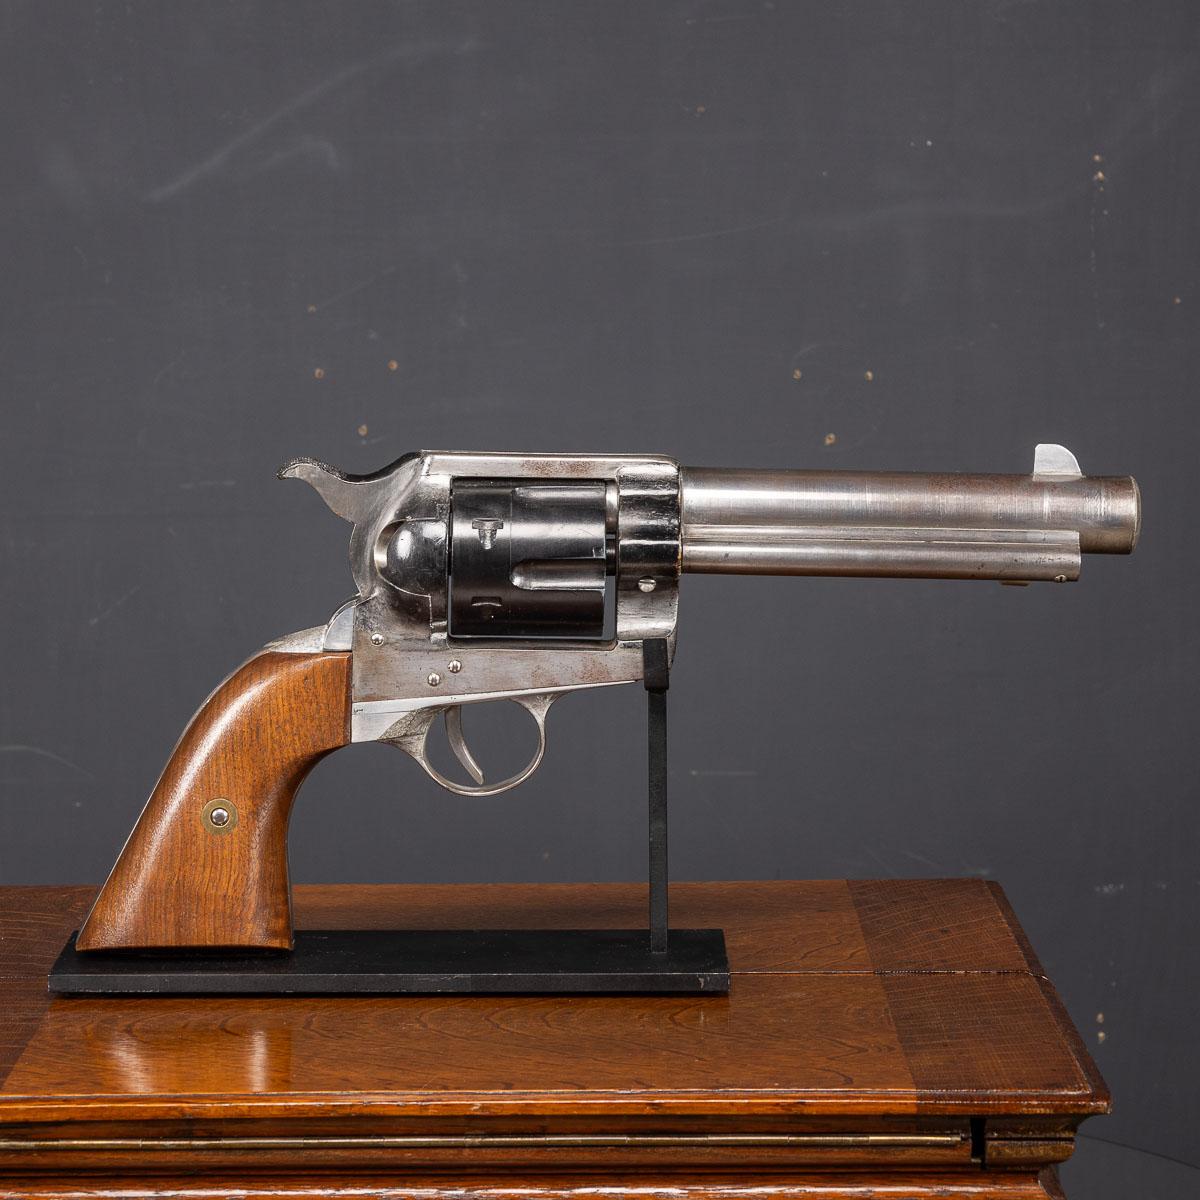 Metal Large Model Of A Smith & Wesson 29 Magnum Handgun For Sale